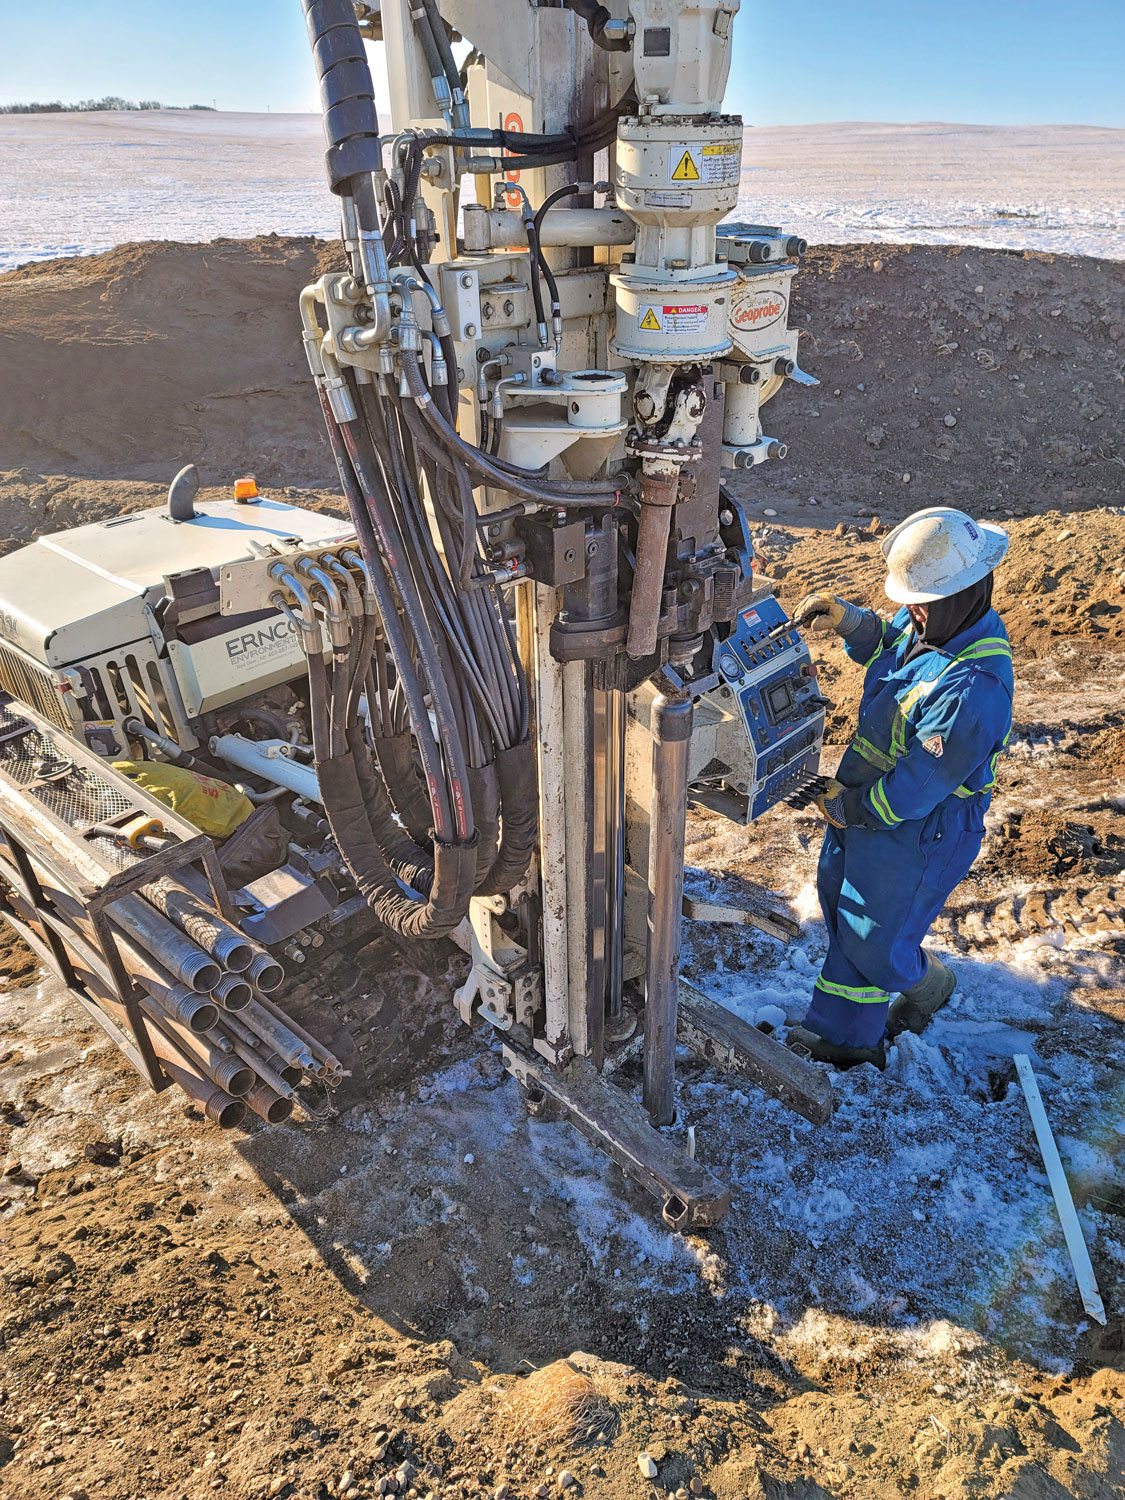 Working directly with Geoprobe® for international service support reduced downtime by 50 percent.